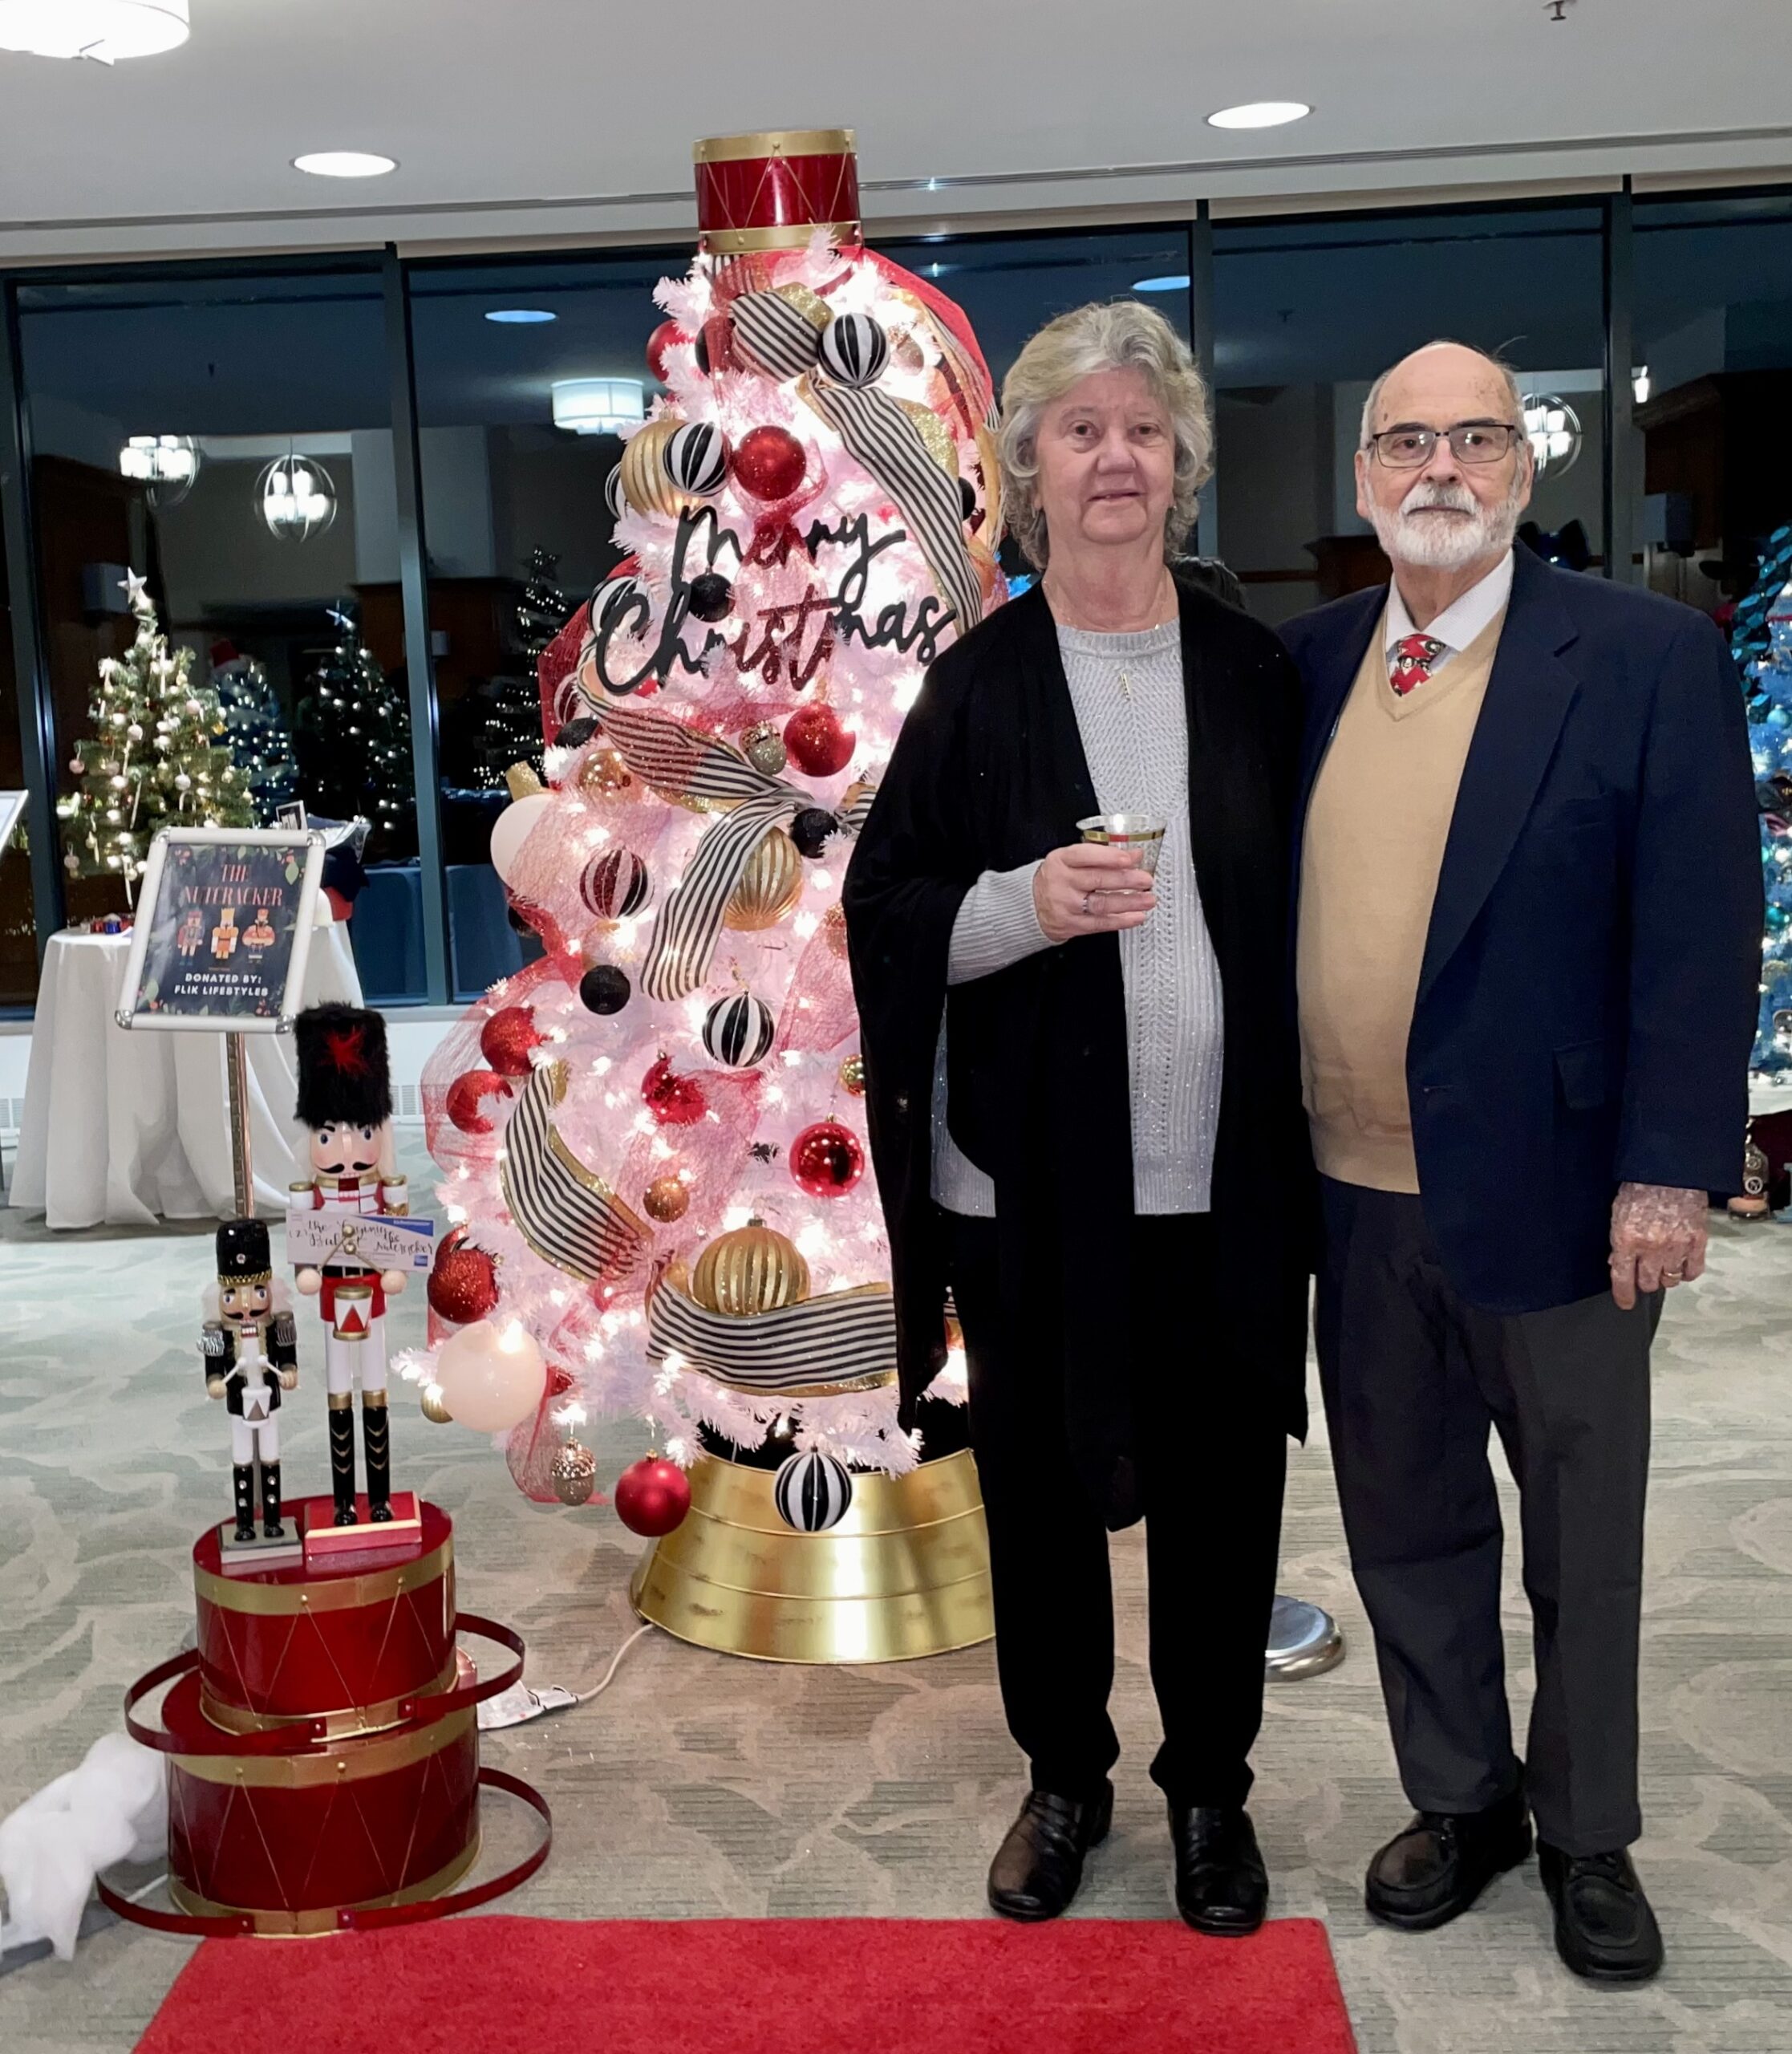 Man and Woman Smiling in Front of Christmas Tree